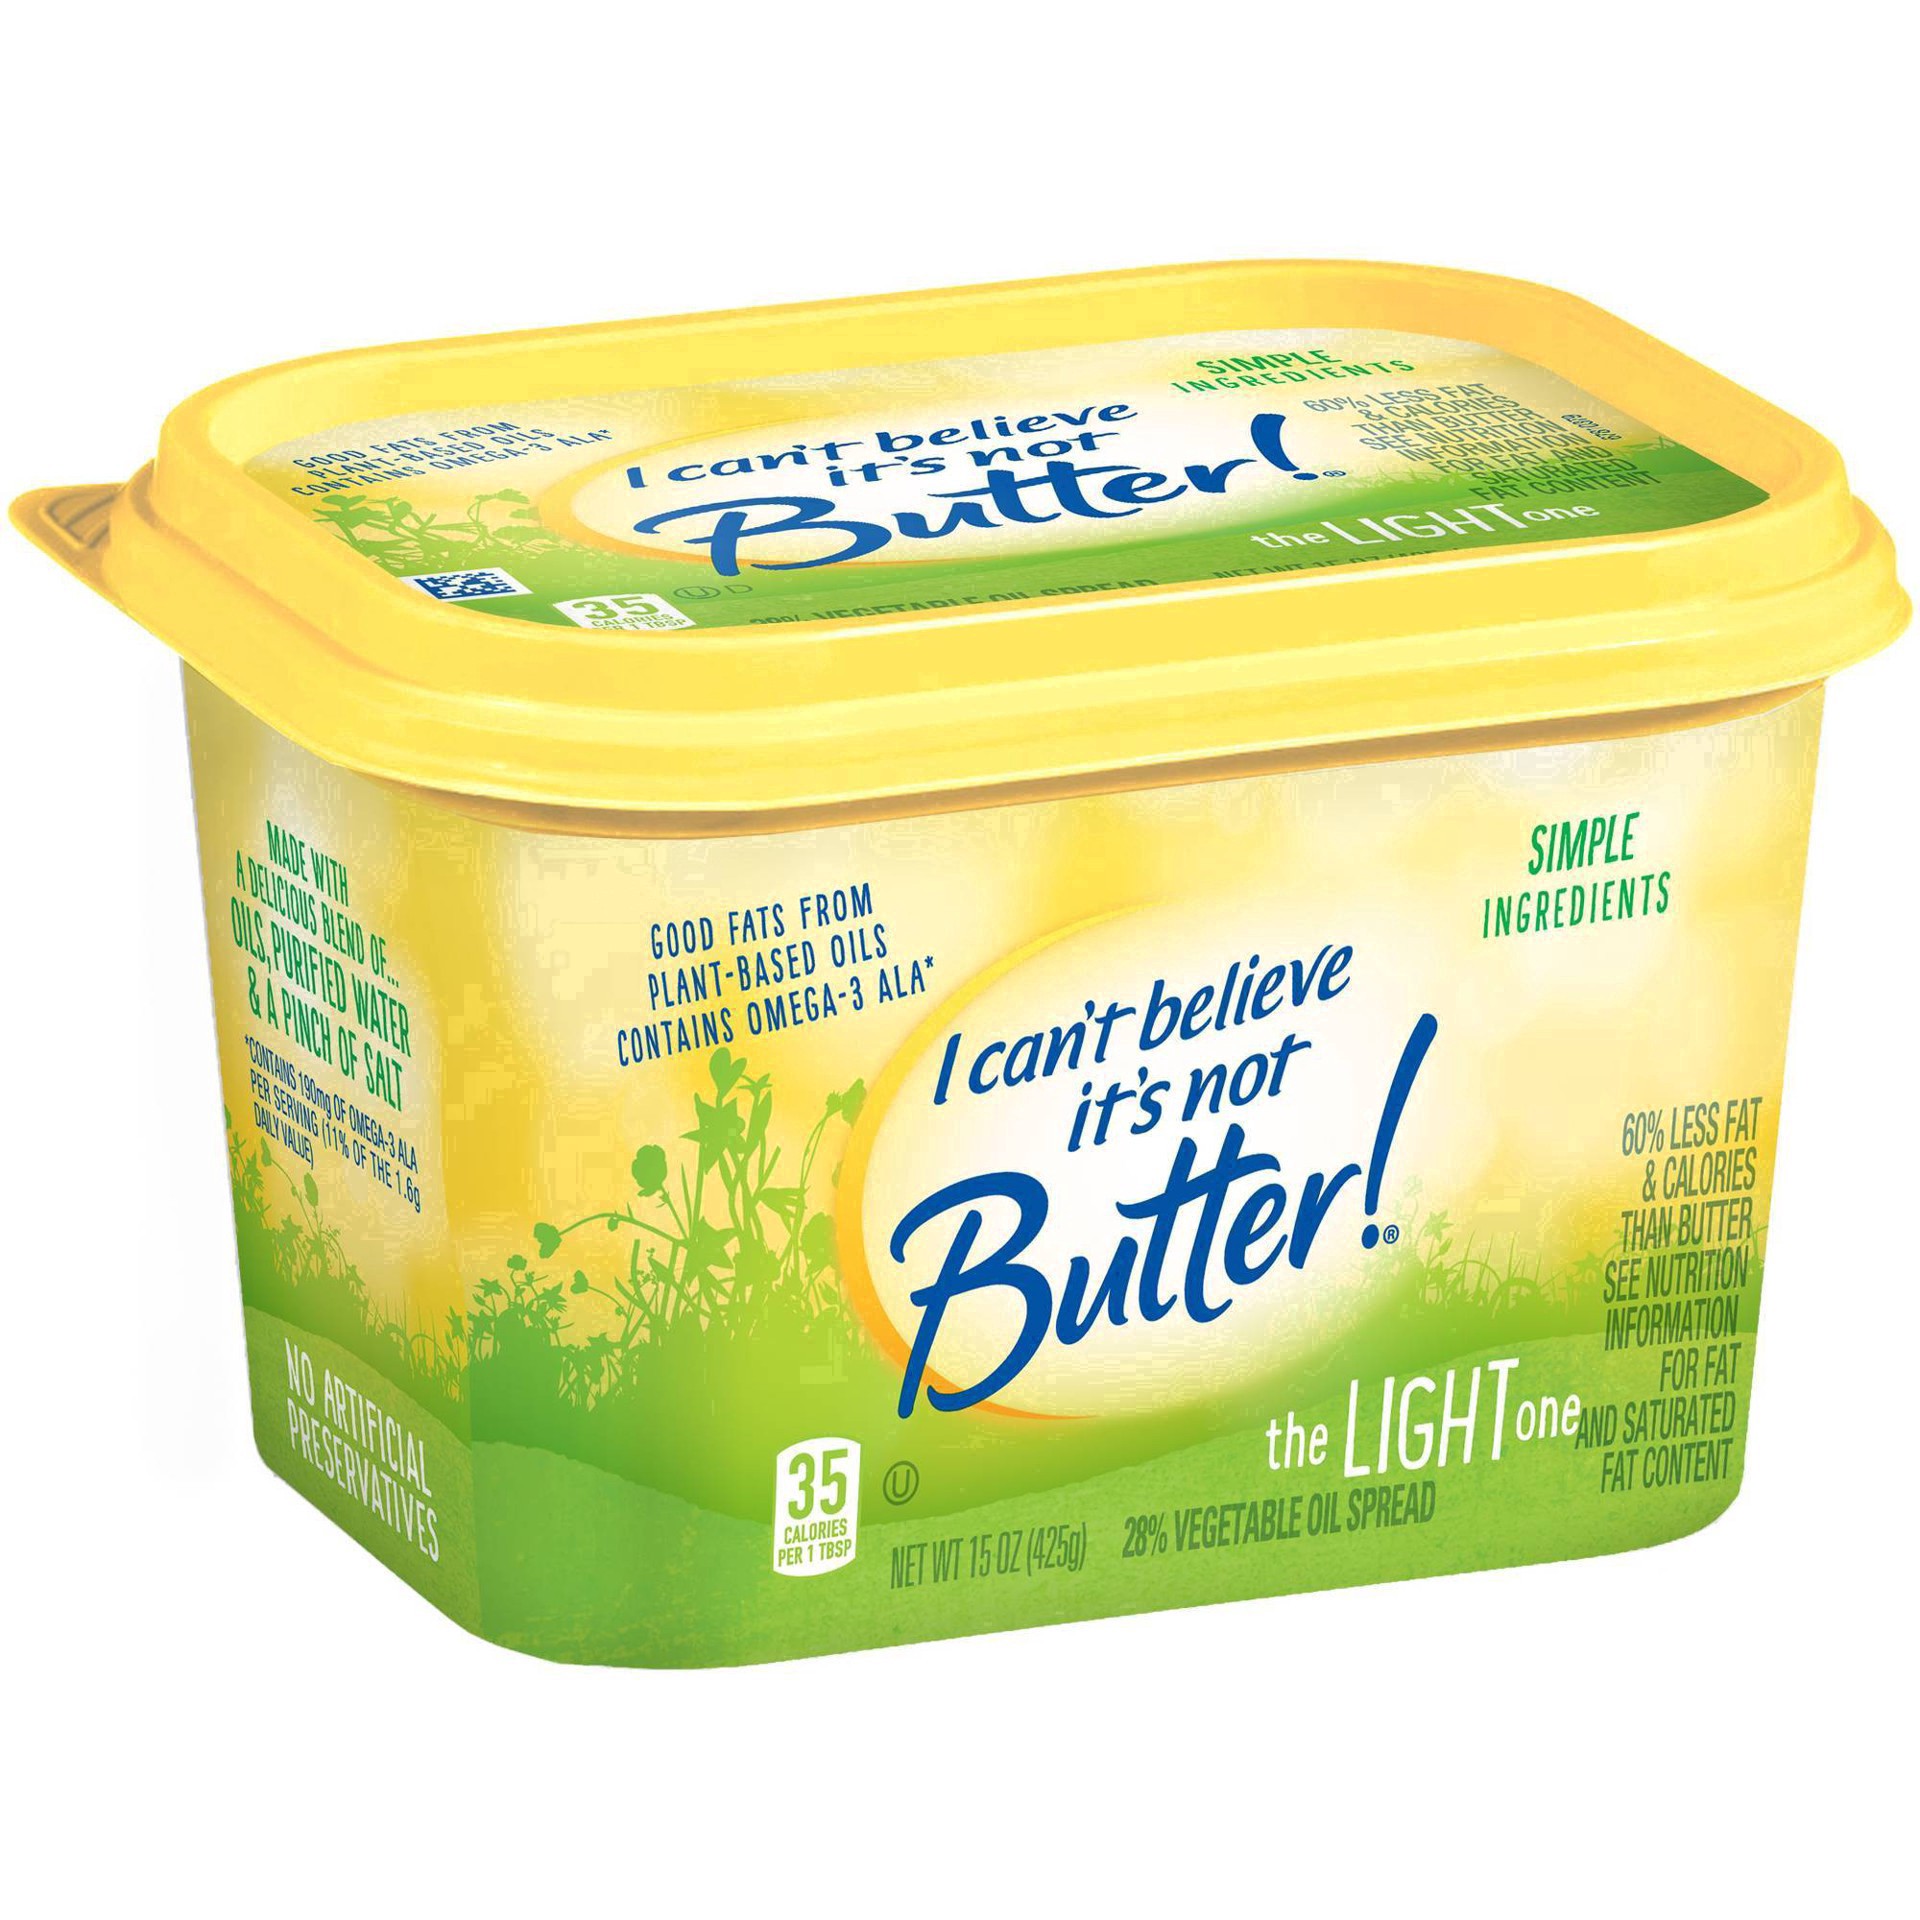 slide 28 of 67, I Can't Believe It's Not Butter! I Can’t Believe It’s Not Butter!® light spread, 15 oz